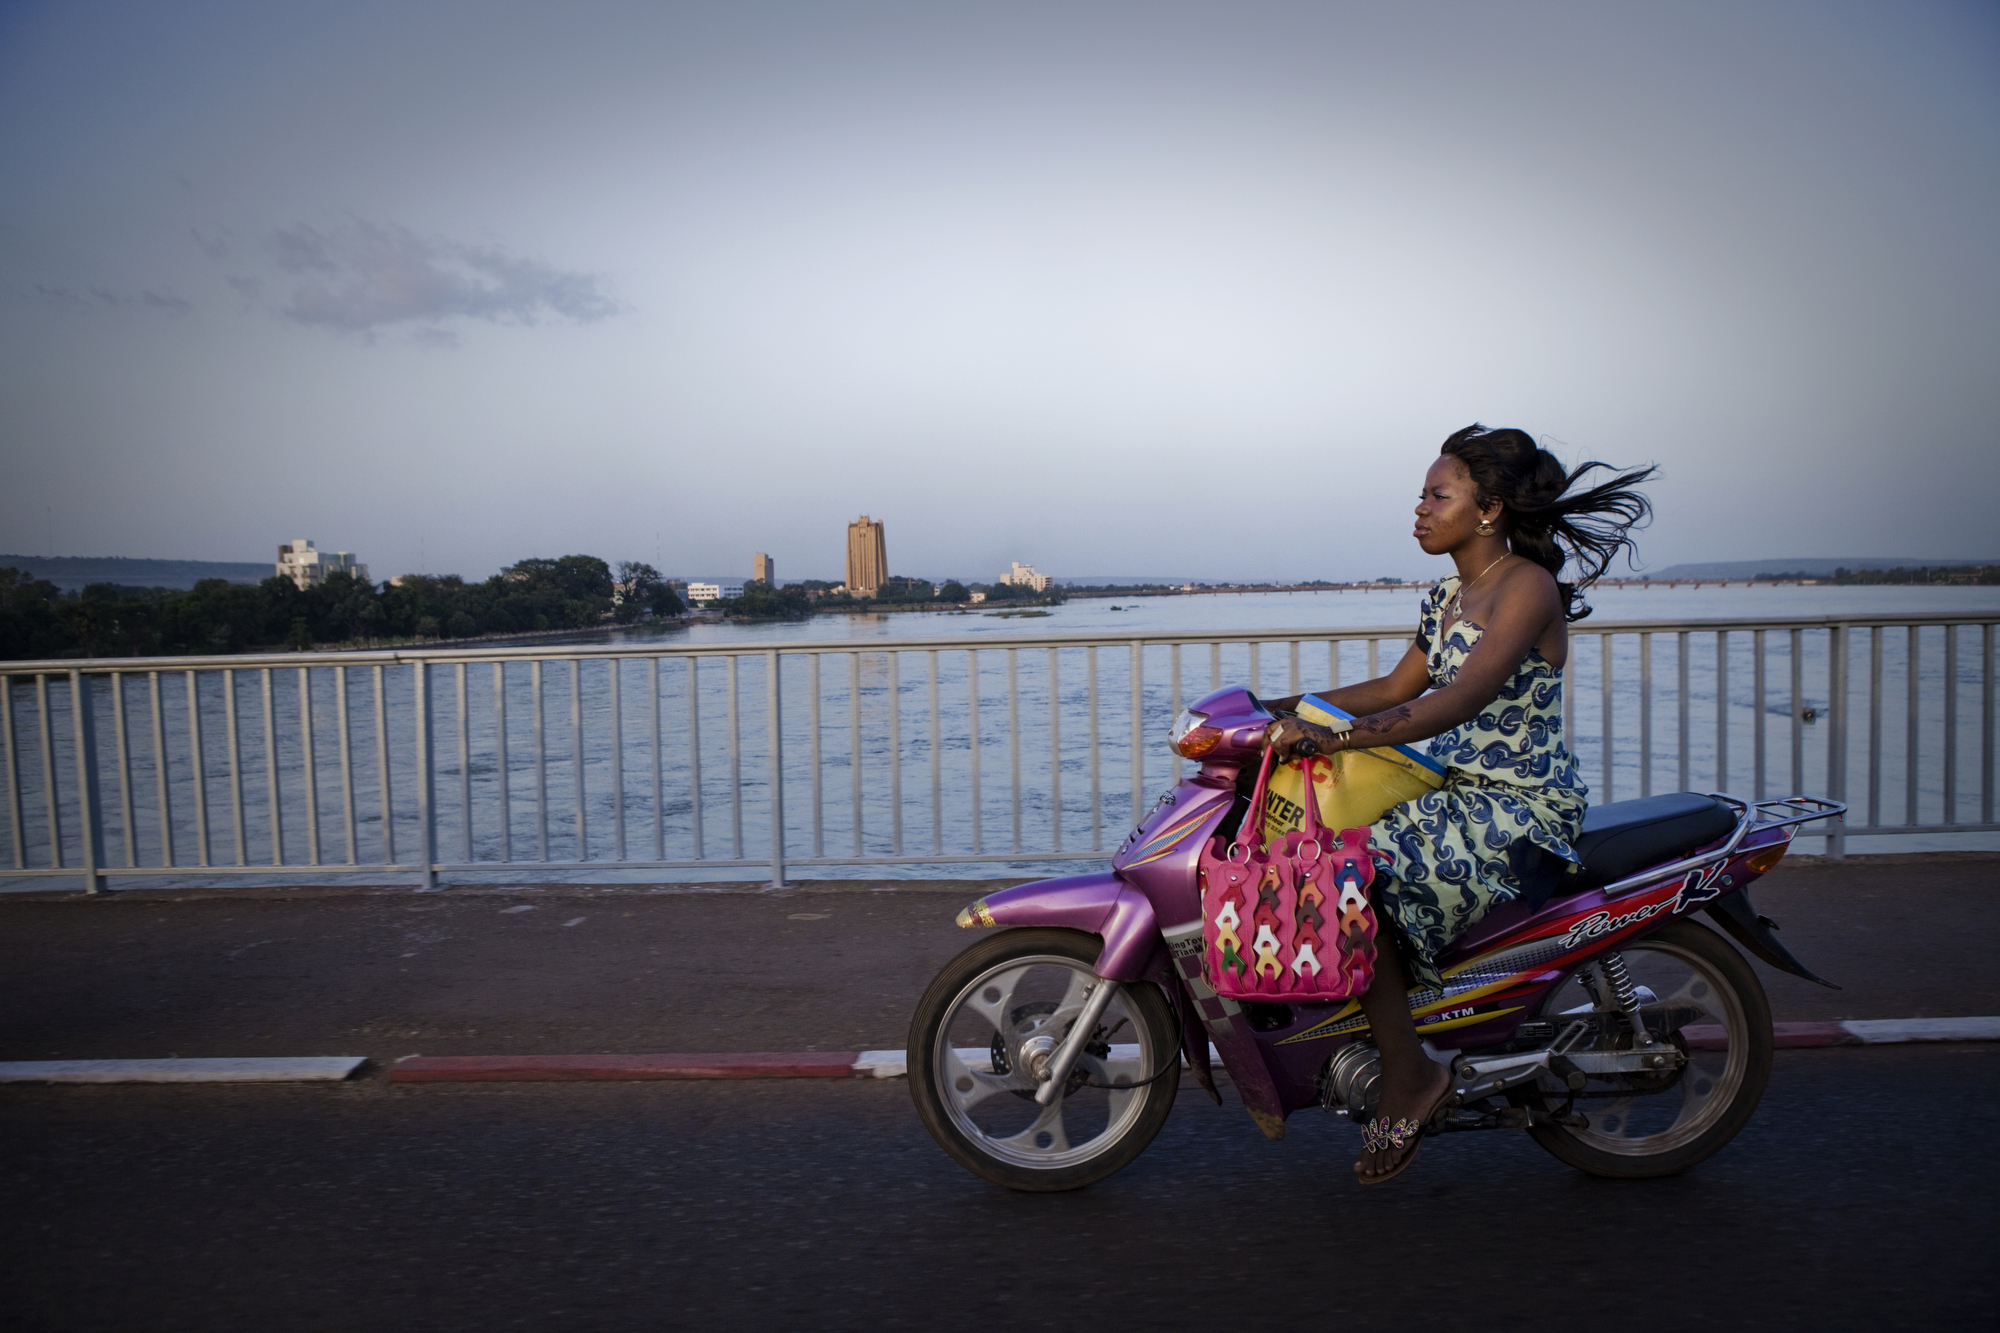  Bamako, Mali. SEPTEMBER 2013. A woman rides her motorcycle across the Niger River in Bamako, Mali. 

Summary: Mali, a predominantly Muslim country, has been known for it�s vibrant culture, rich ancient Islamic history, religious tolerance and joyful